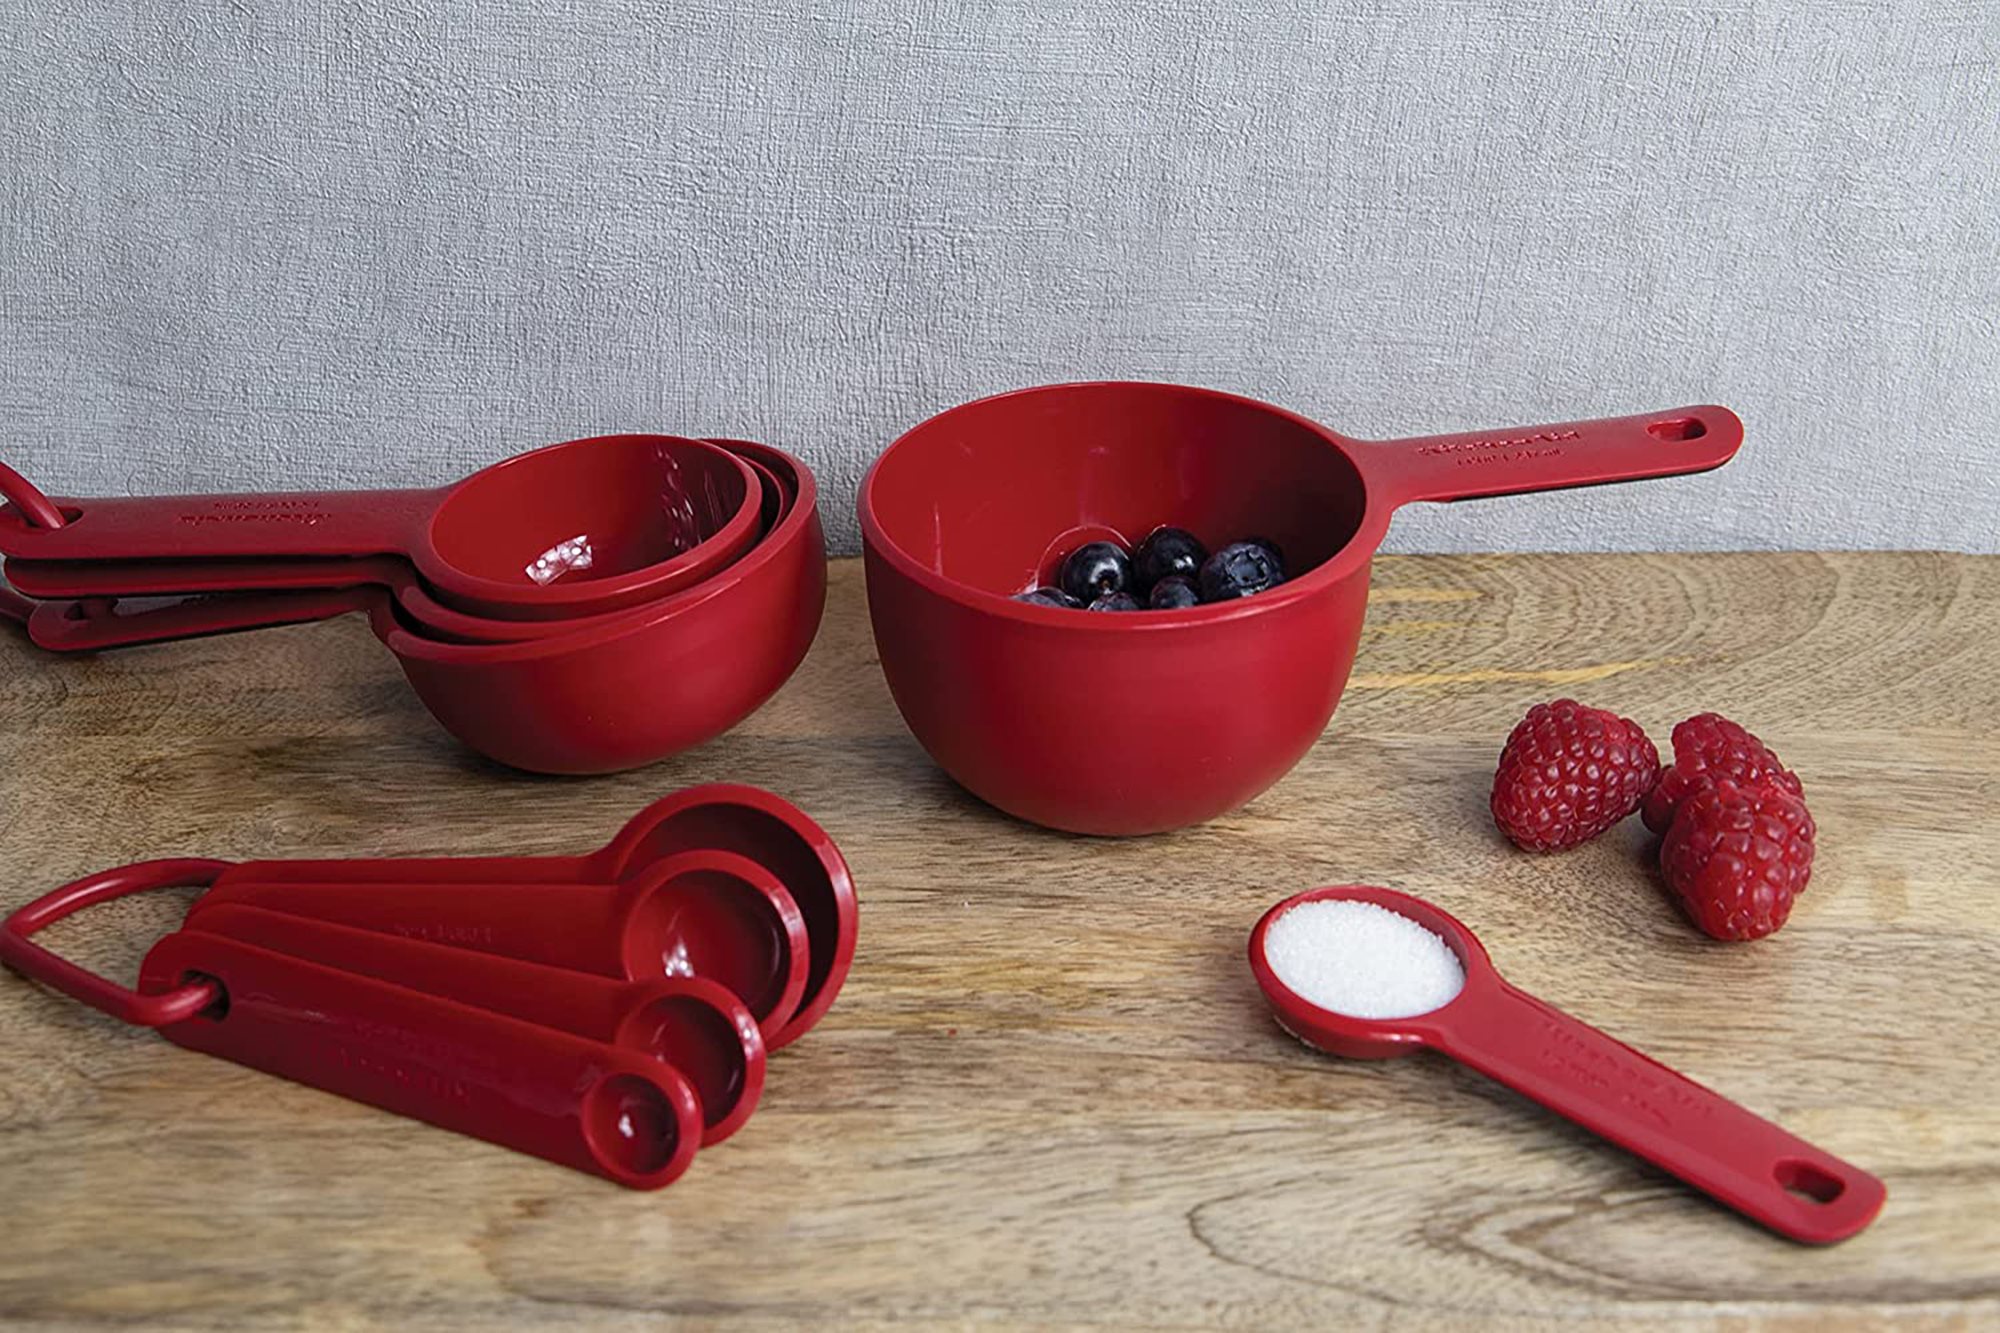 Set of 5 measuring spoons, Empire Red color - KitchenAid brand